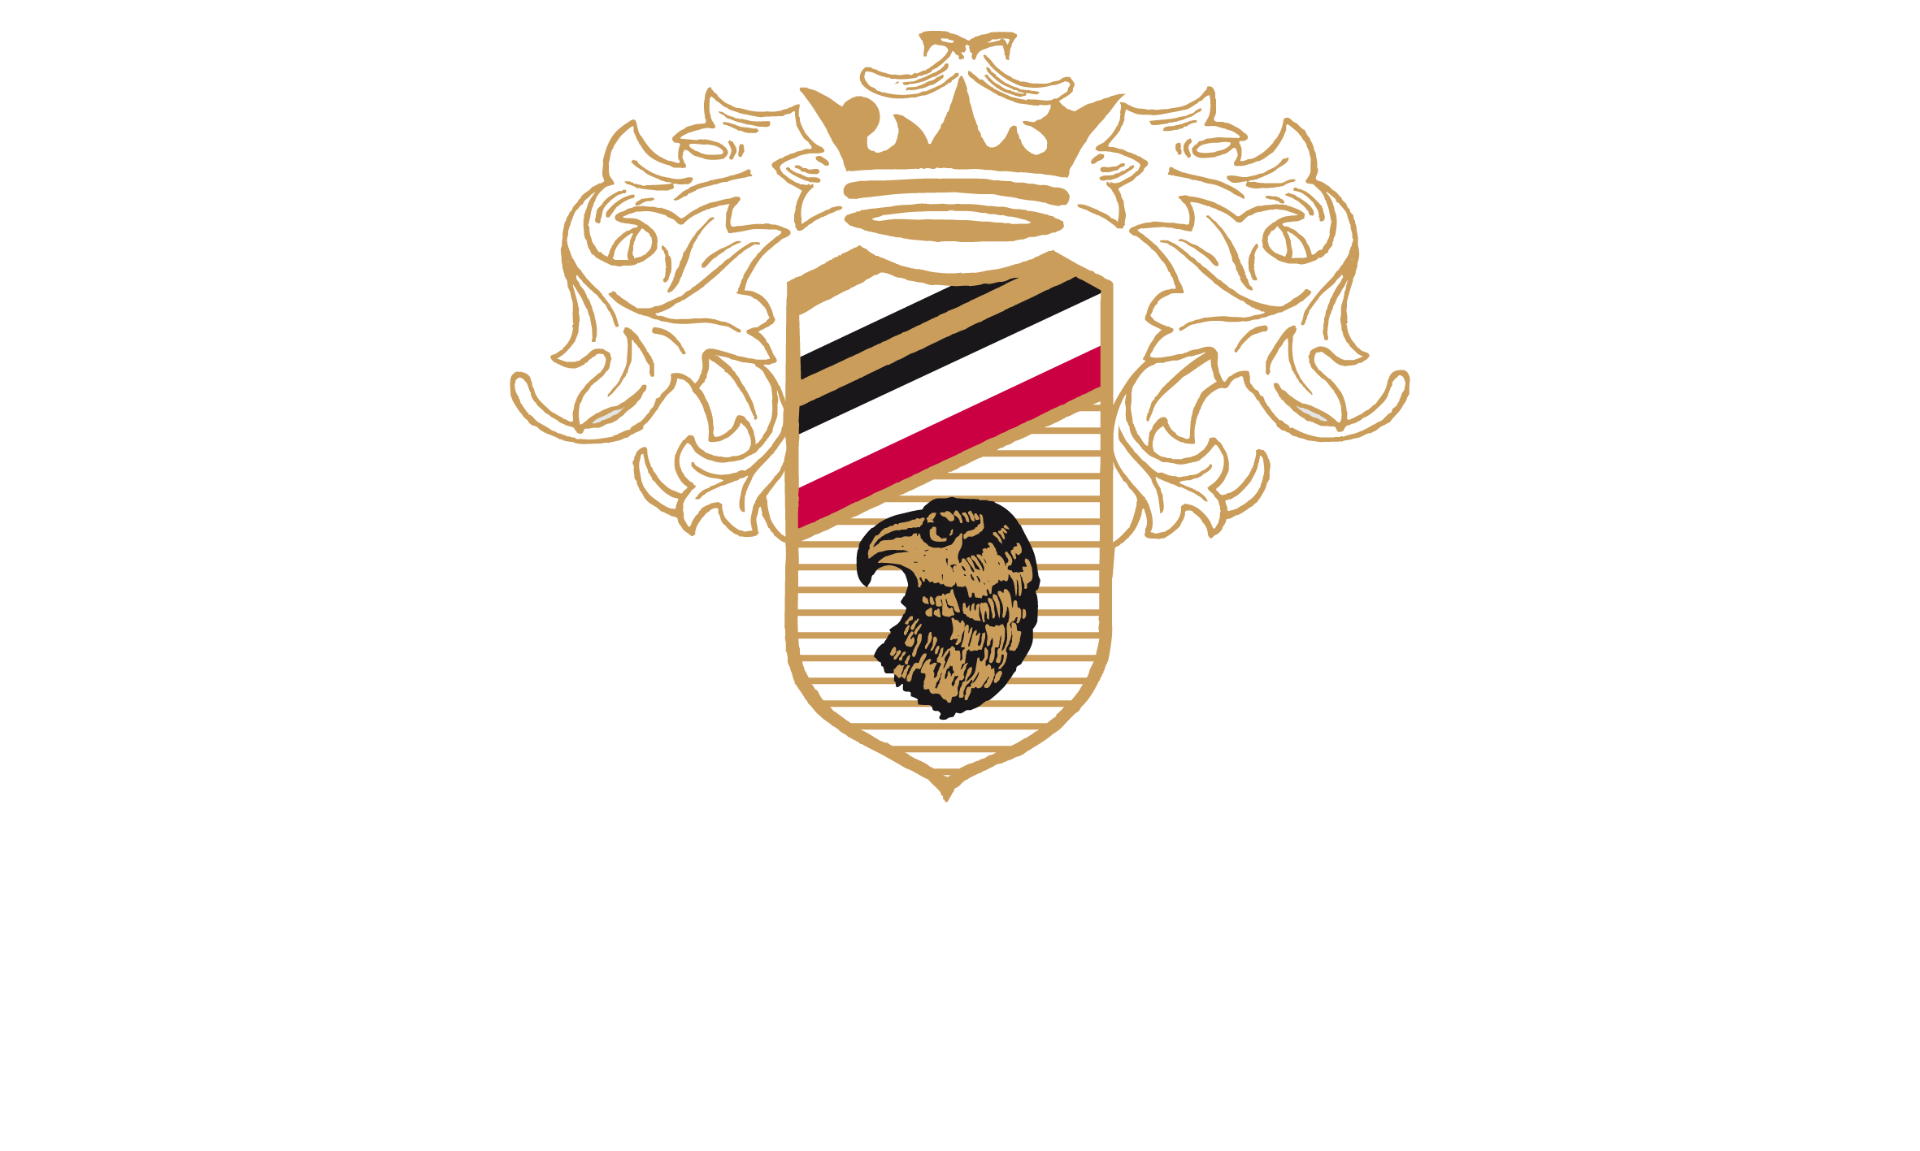 The logo for Azienda Uggiano winery in Tuscany, Italy.